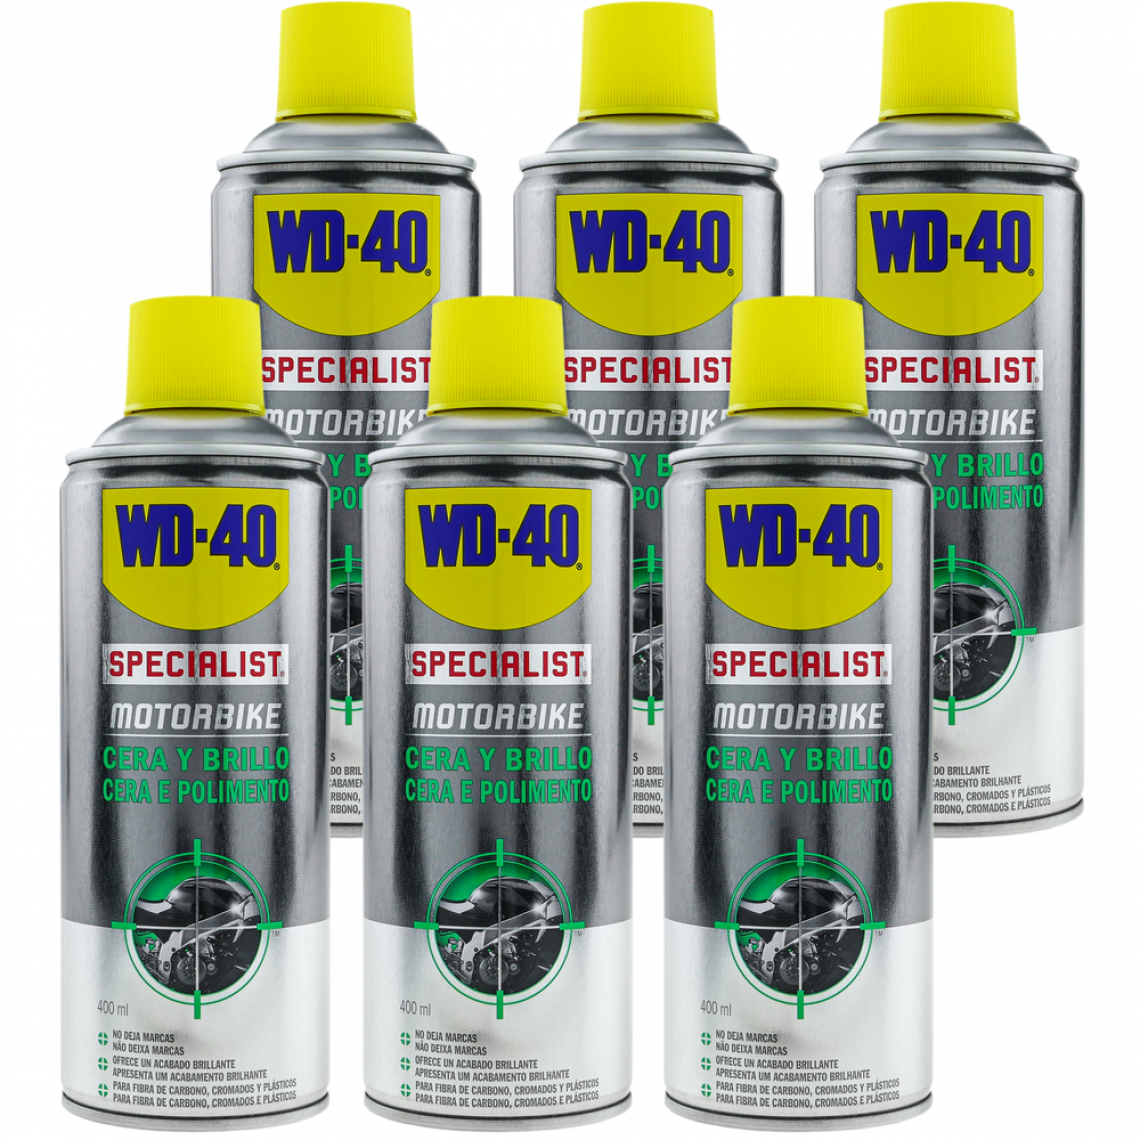 Wd-40 - Wax and shine SPECIALIST MOTORBIKE 400 ml (boîte de 6 unités) - Mastic, silicone, joint